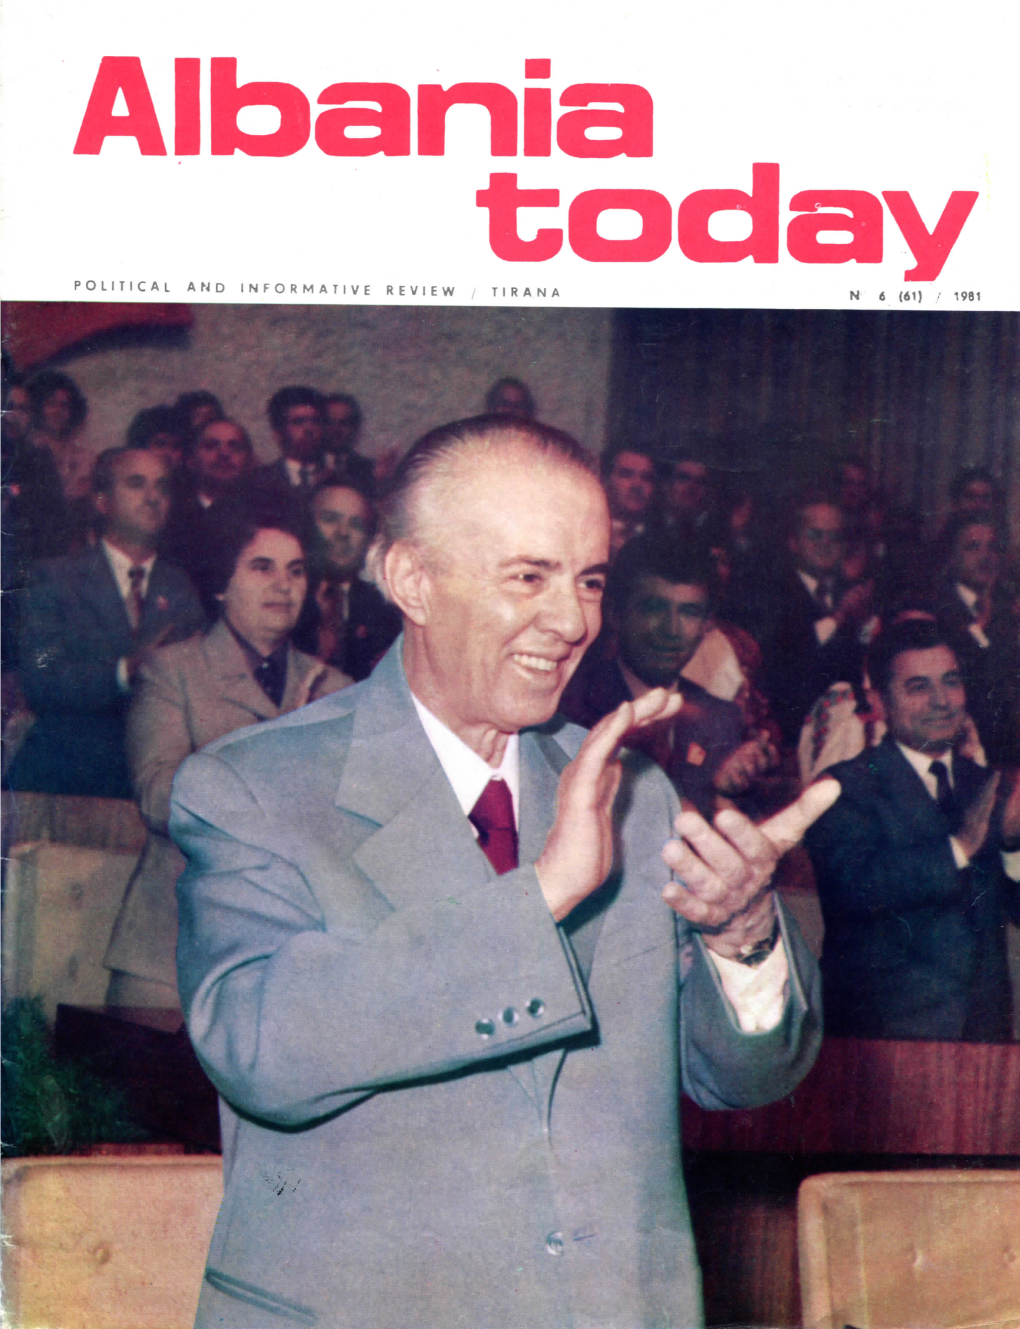 ALBANIA TODAY» Is Dedicated to the 8Th Congress of the Party of Labour of Albania^ Held from the Ht to 7Th of November 1981 in Tirana